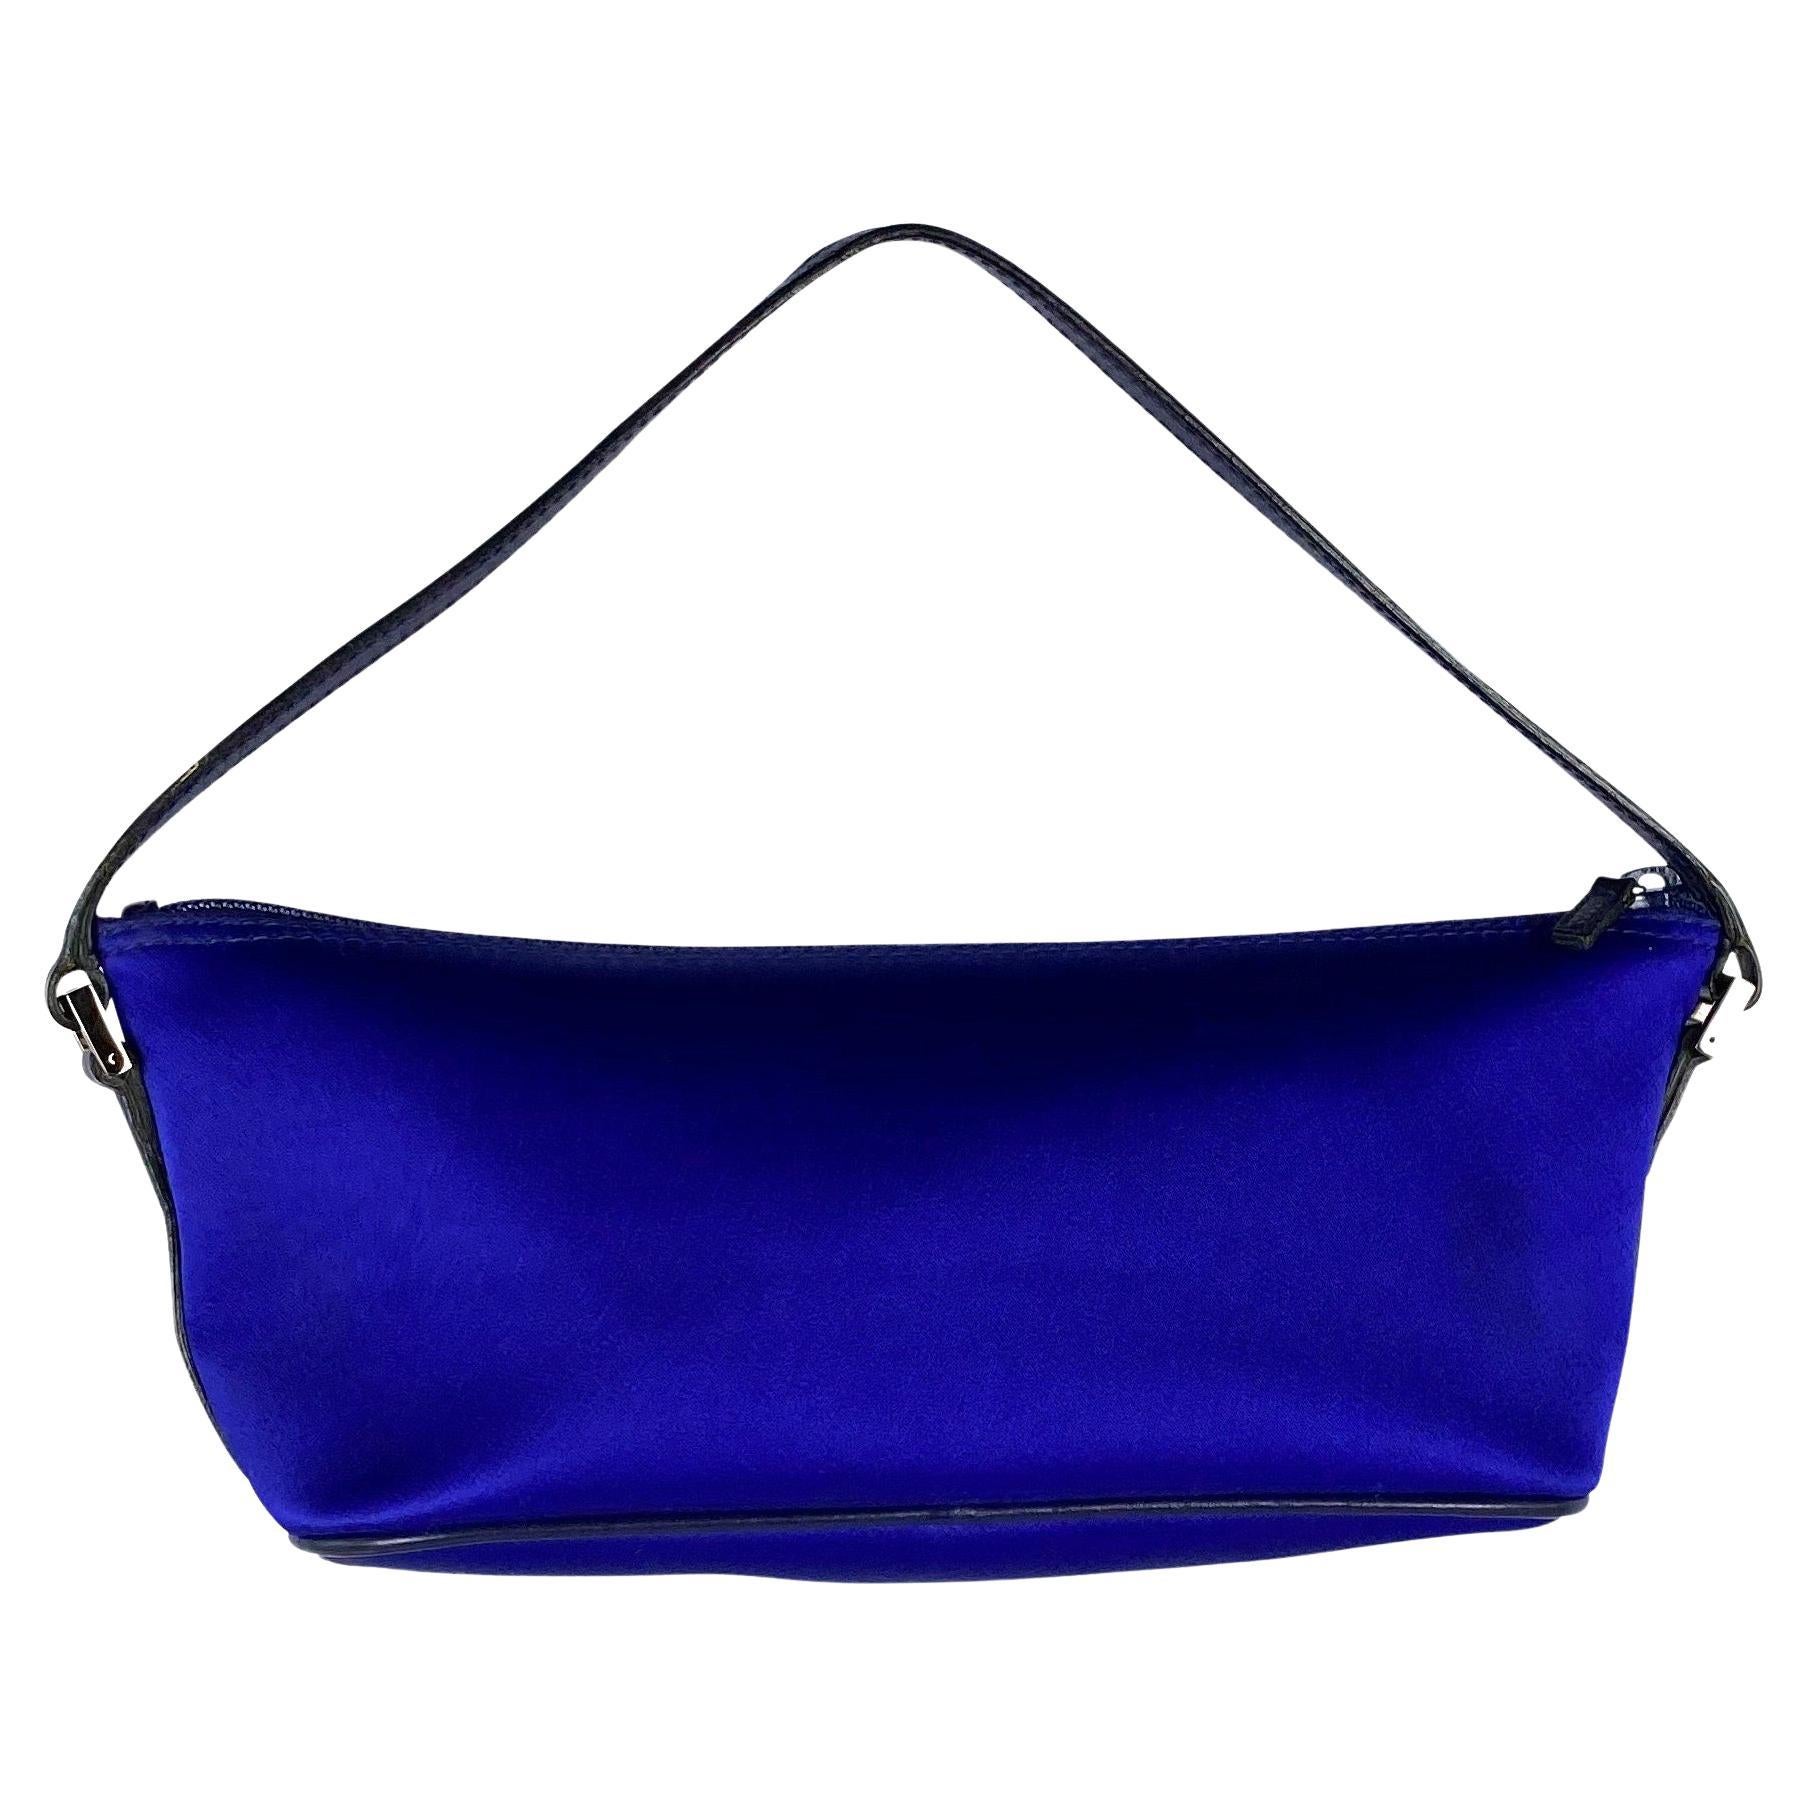 S/S 2001 Gucci by Tom Ford Royal Blue Satin Boat Pochette Mini Bag For Sale 3